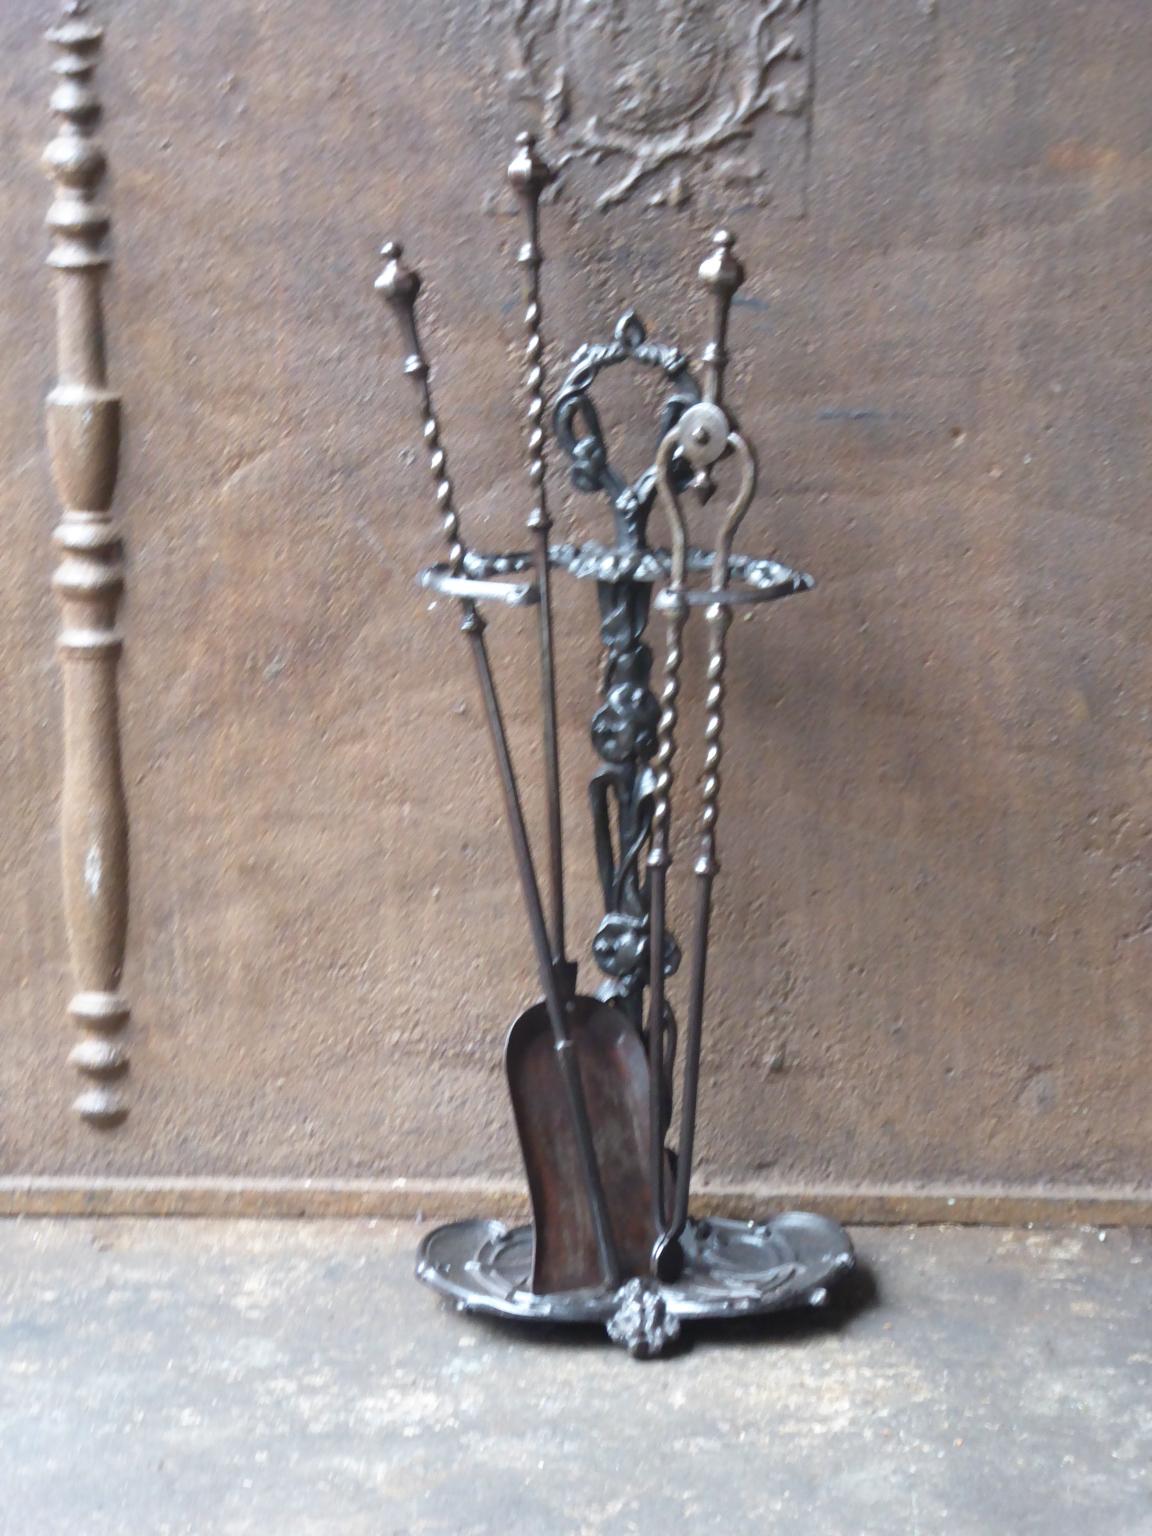 English set of three wrought iron fireplace tools with a stand made of cast iron. The fire tool set is in a good condition and is fully functional. 19th century, Victorian.